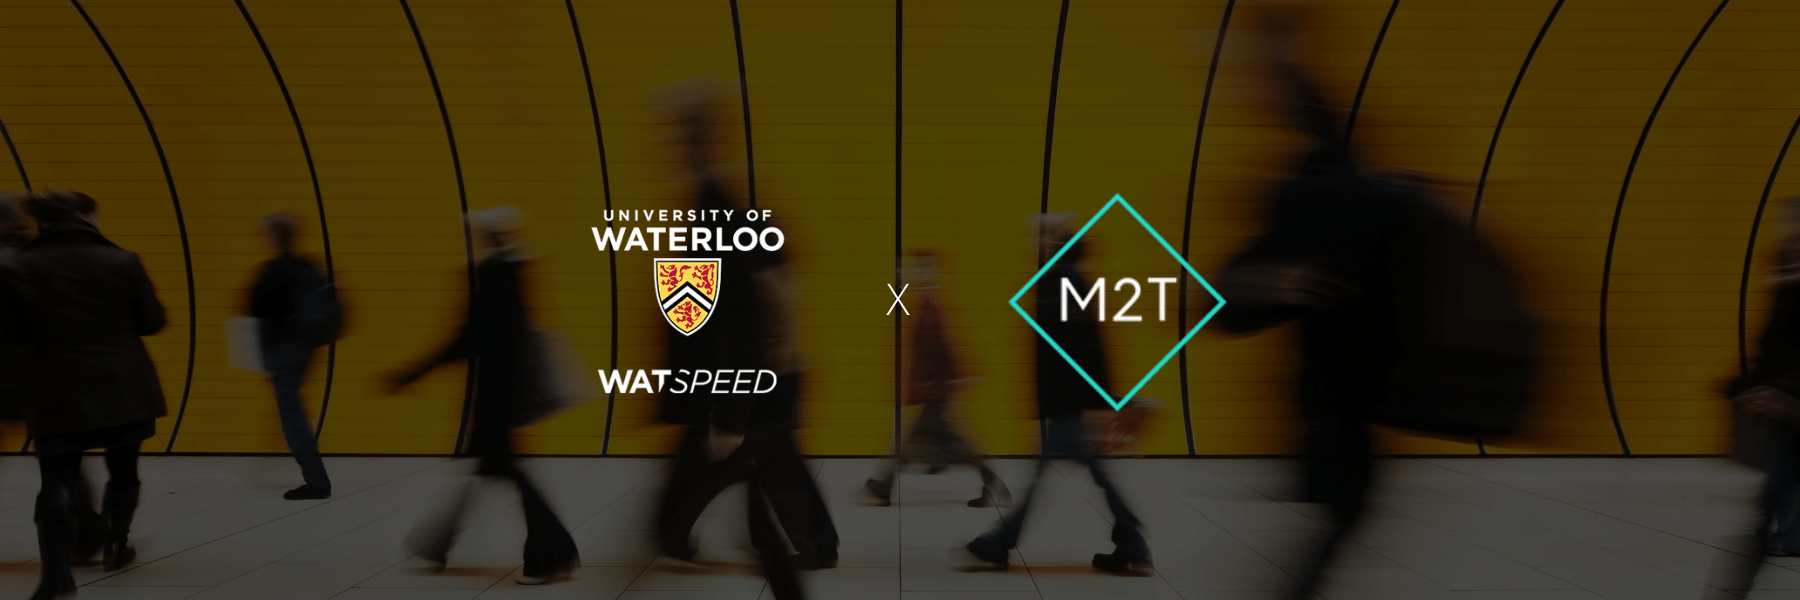 Logos for WatSPEED at the University of Waterloo and M2T Collective